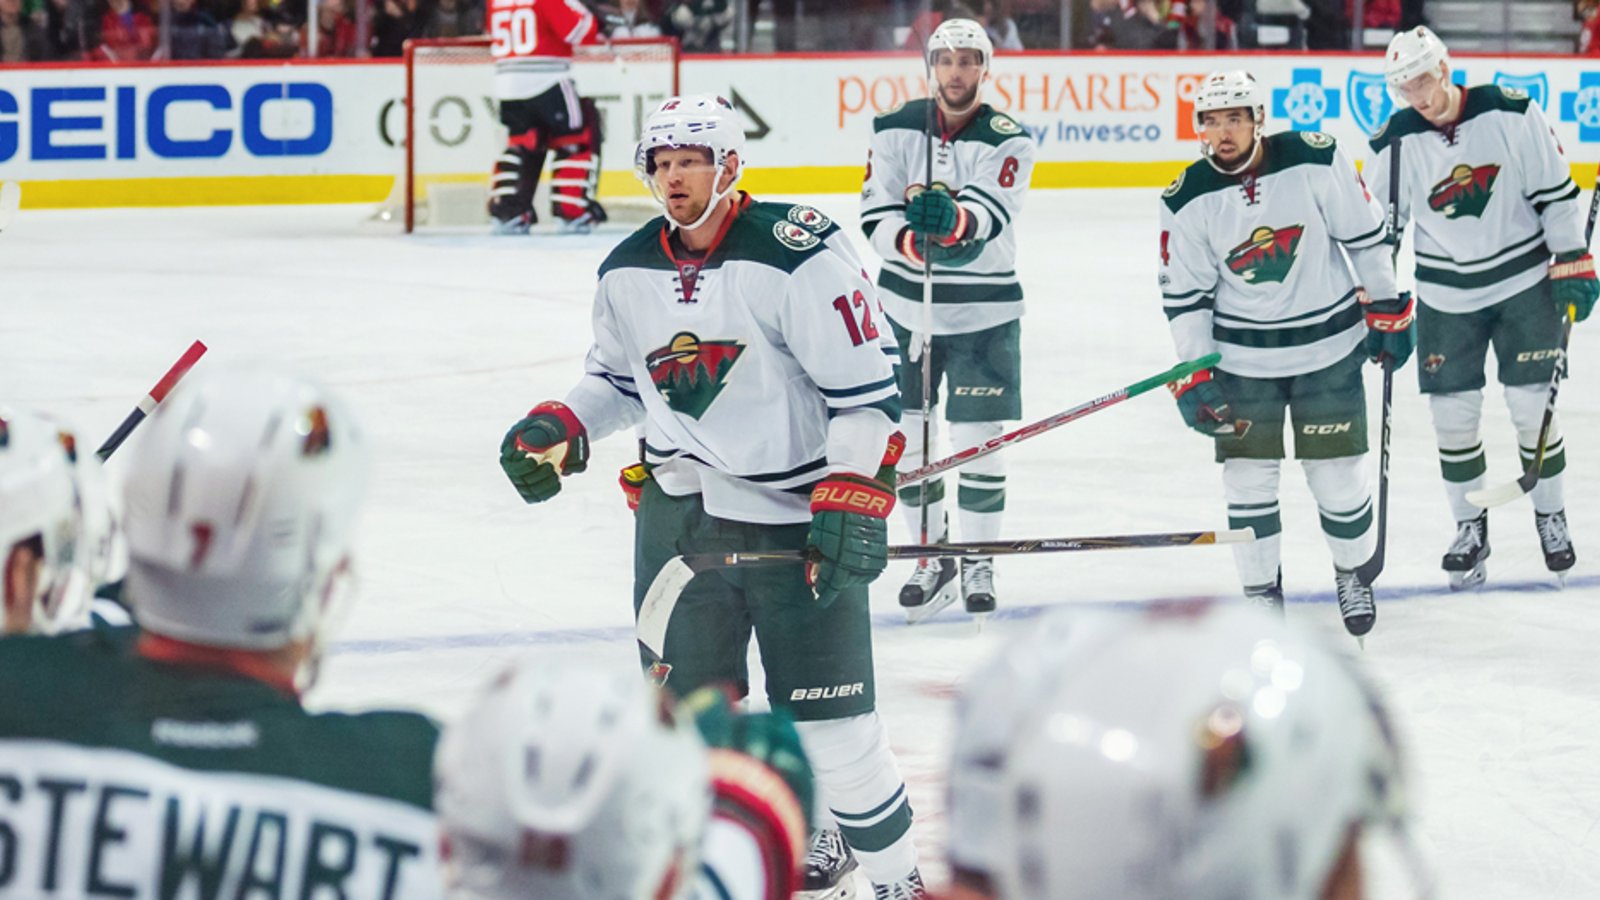 Breaking: The Minnesota Wild have made a move.